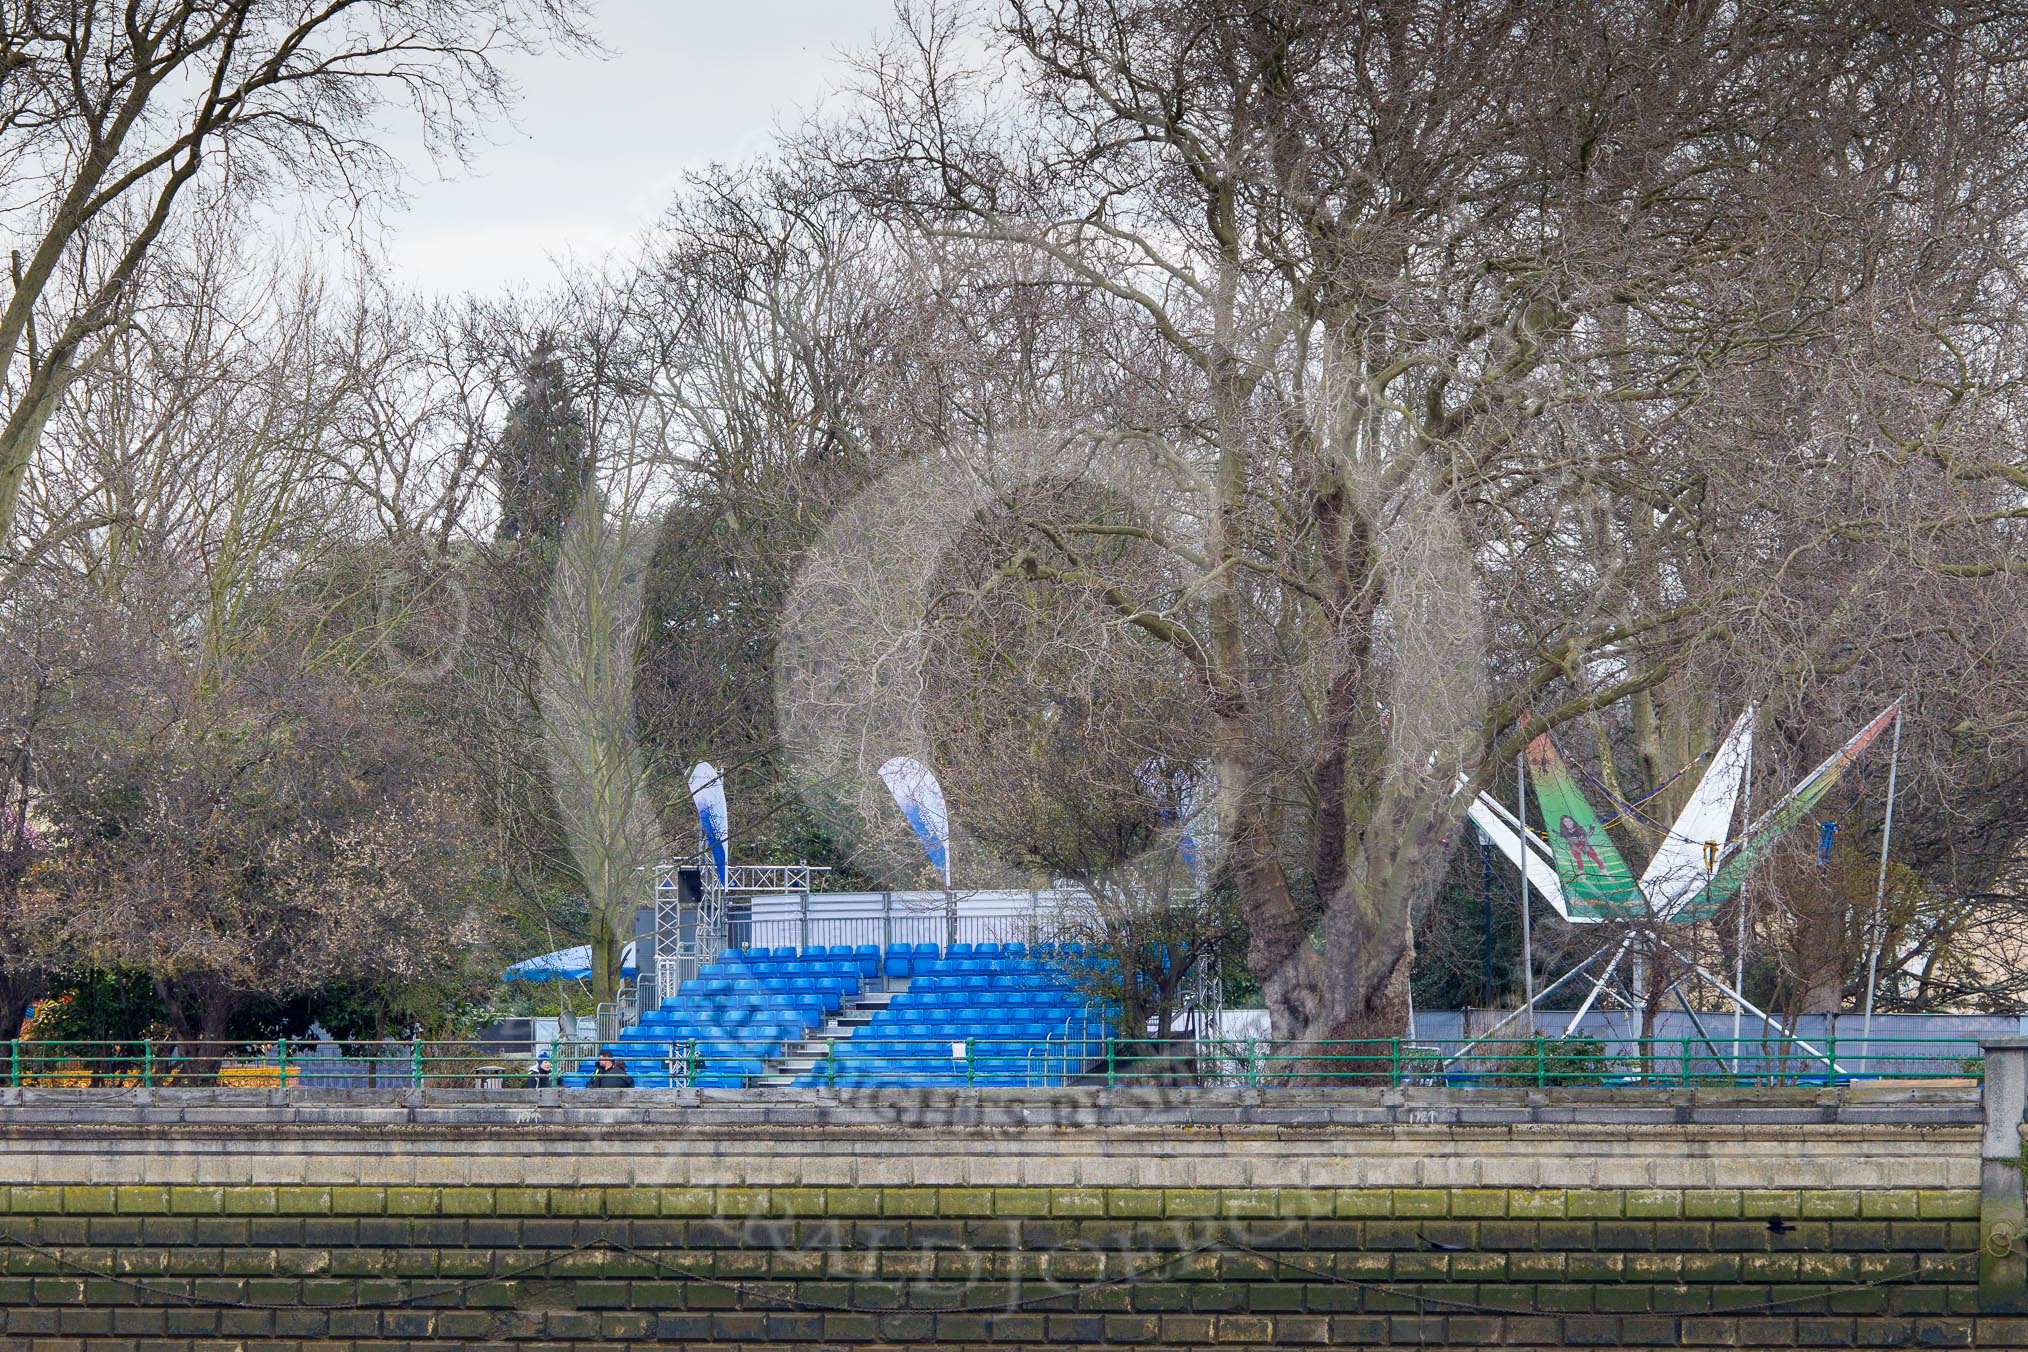 The Boat Race 2013: Grandstand at Fulham Palace Gardens, hours before the start of the 2013 Boat Race..
Putney,
London SW15,

United Kingdom,
on 31 March 2013 at 11:58, image #37